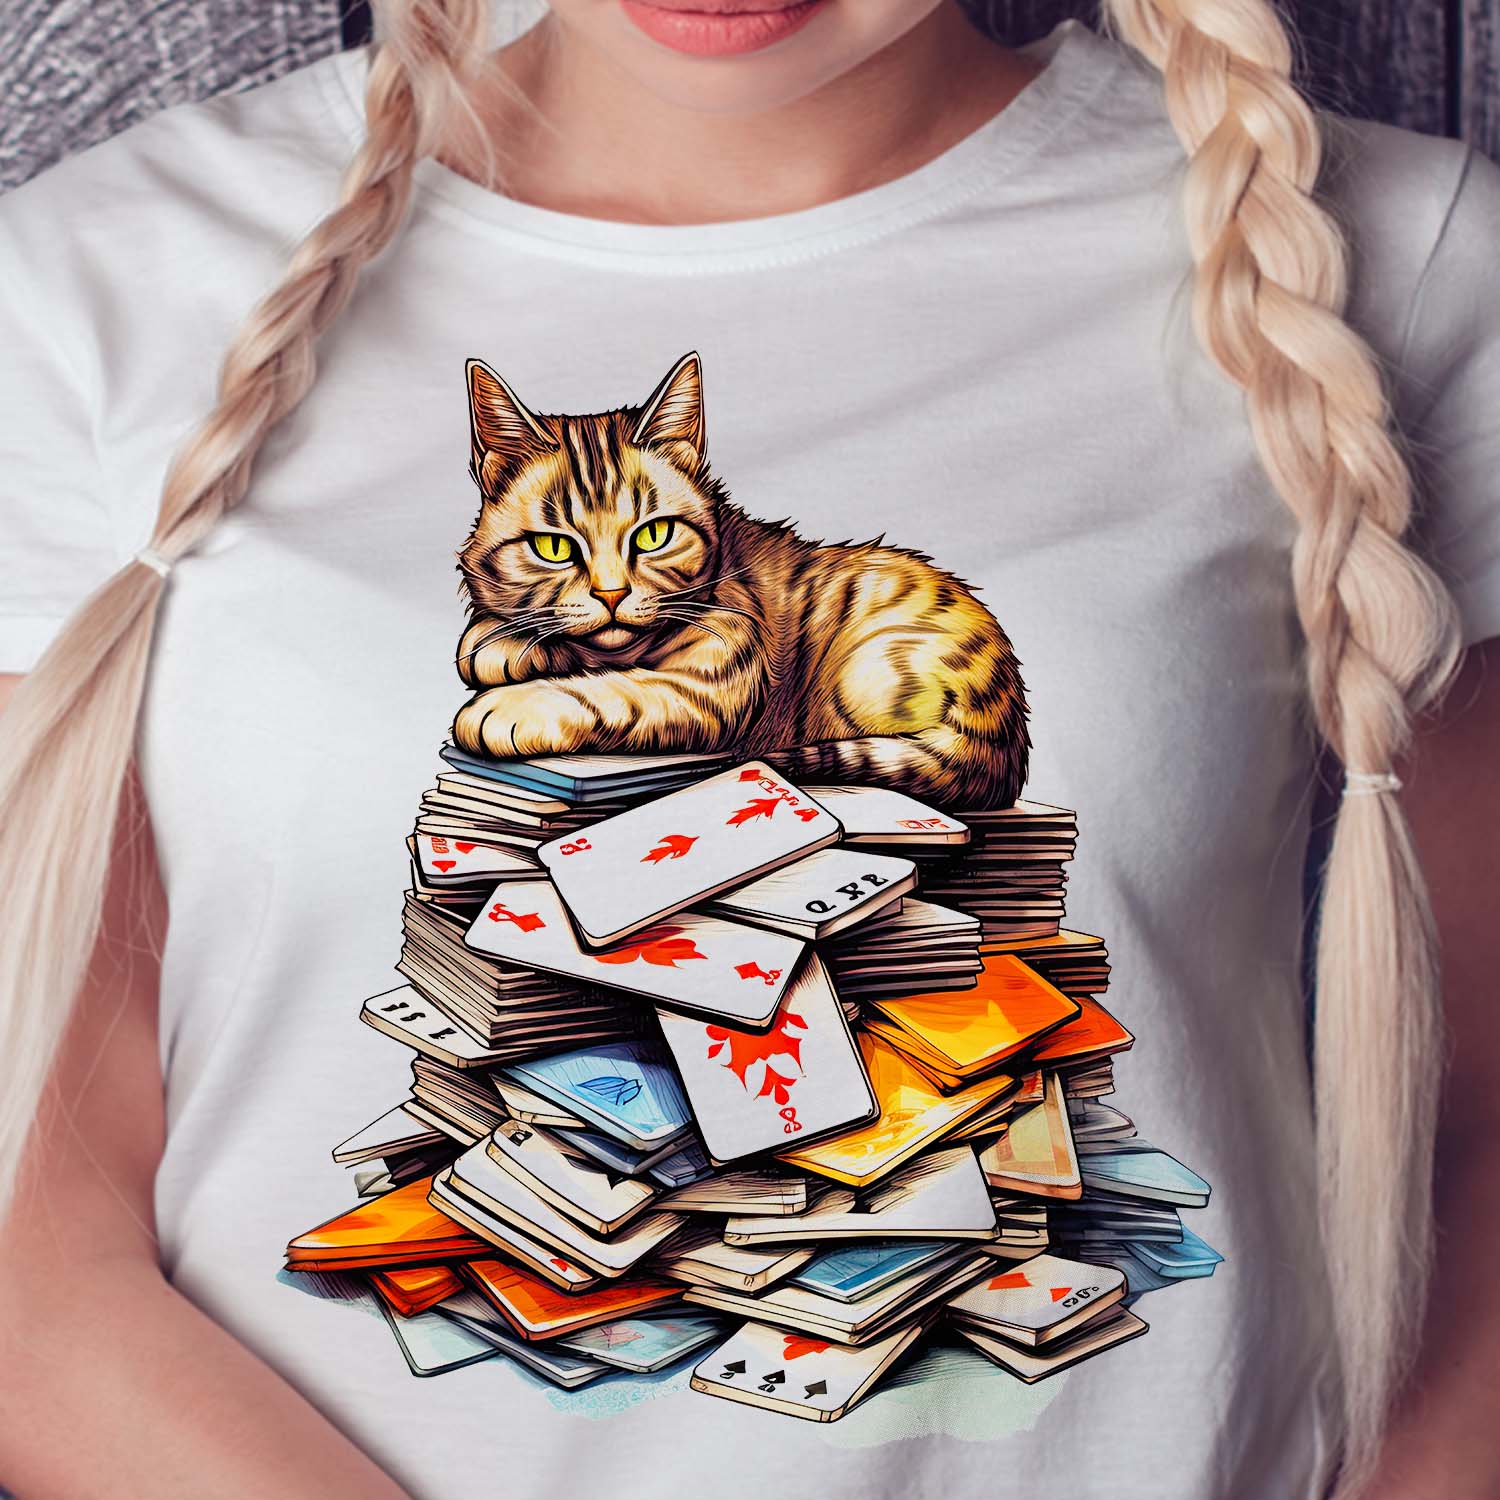 cat sitting on a pile of playing cards